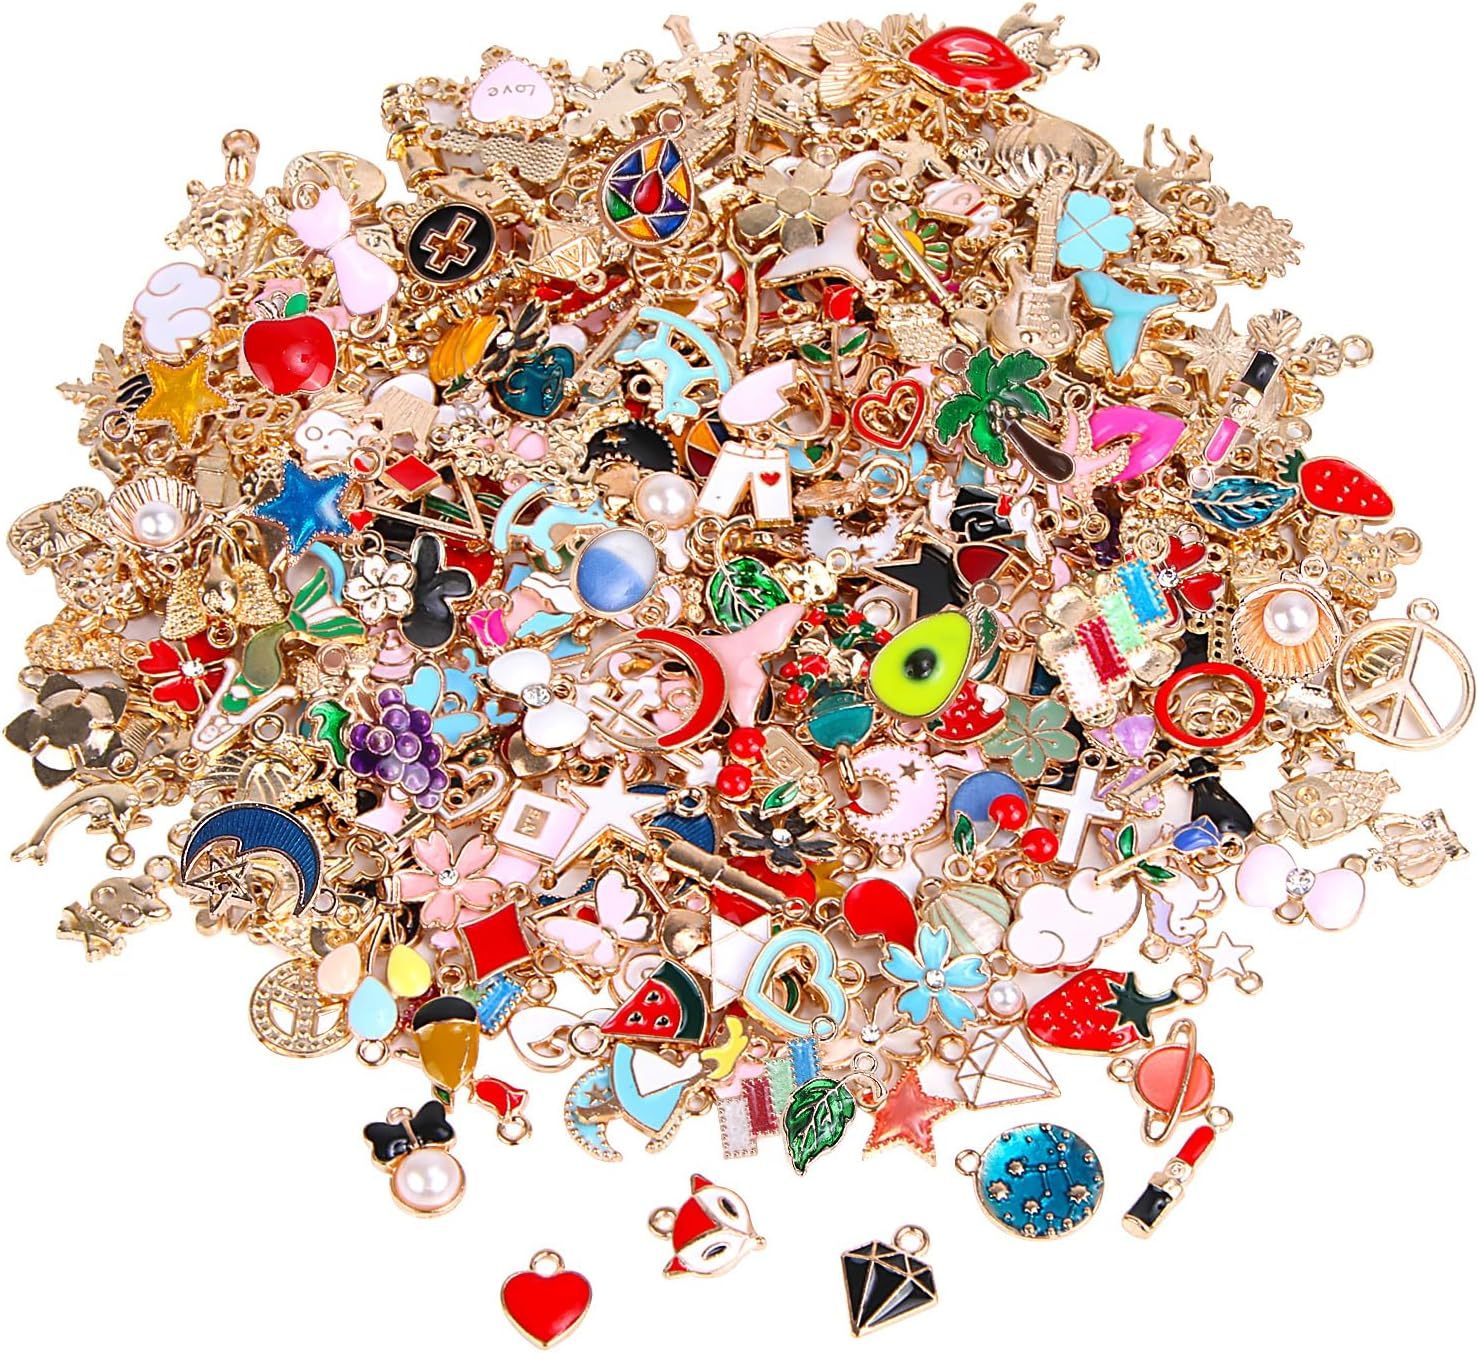 Bulk Enamel Charms, Multicolor Charms , Assortment of Gold Enamel Charms  for Jewelry Making pick the Charms You Wantcheck DESCRIPTION 